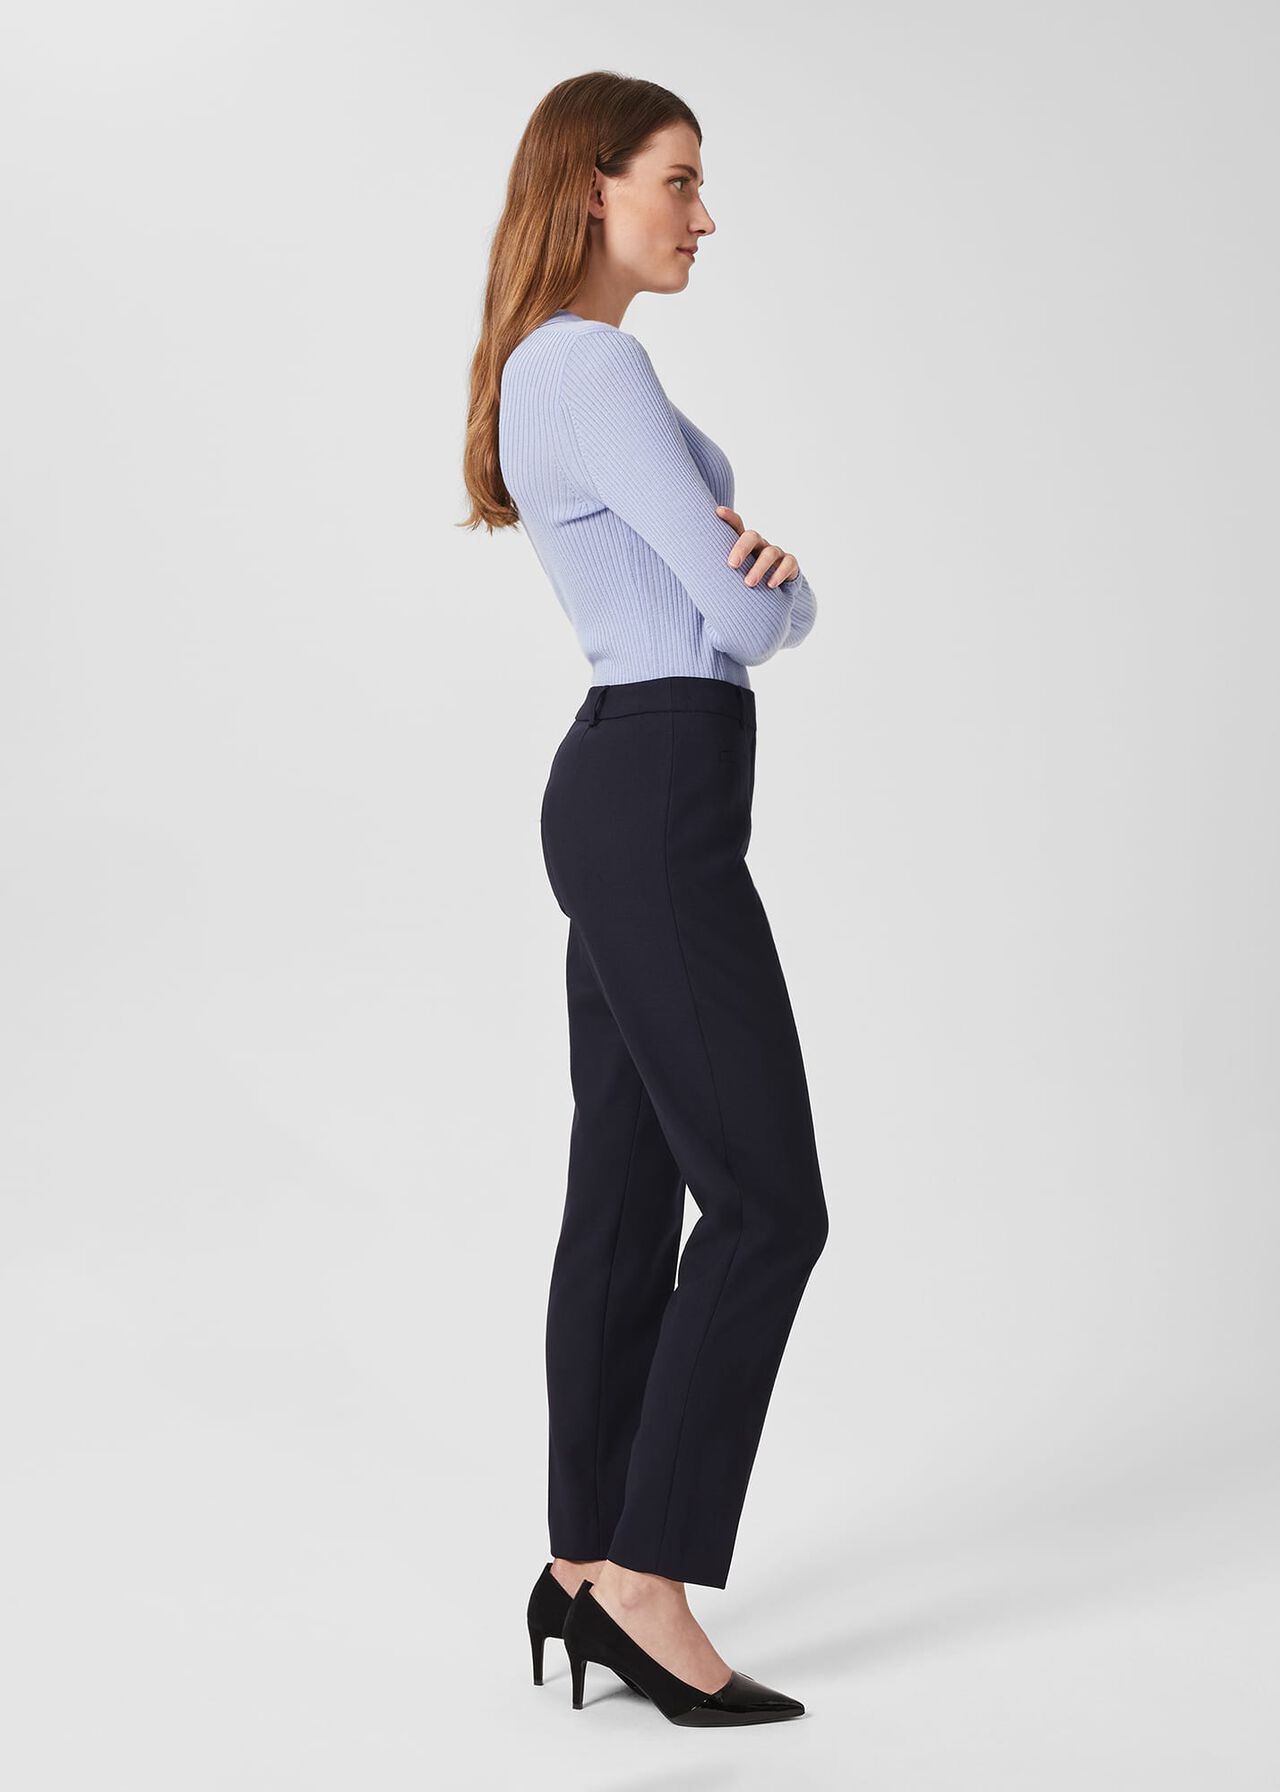 Laurel Tapered Trousers, Navy, hi-res